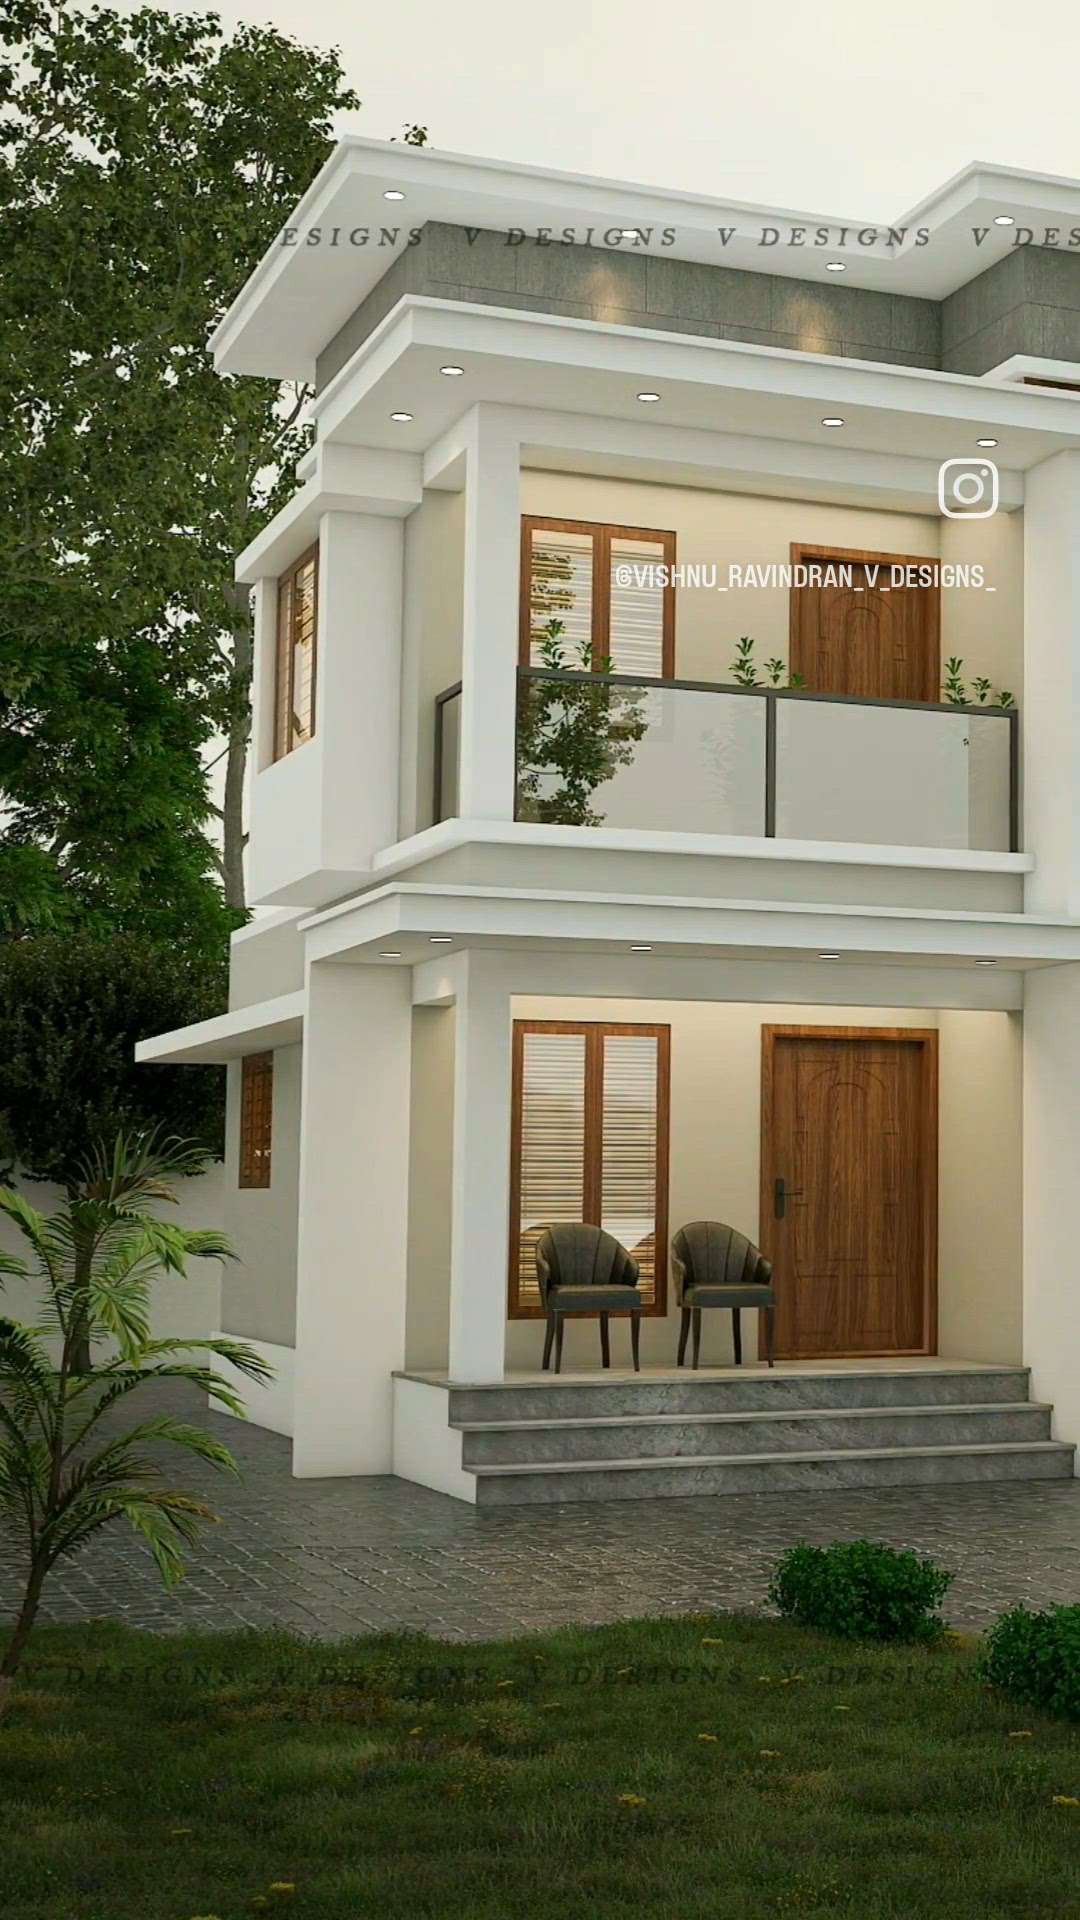 3Bhk home design.
1450 Sqft
Cleint : Athul raj, thiruvanchiyoor
aprox budget : 39 Lakh

for more design. visit Instagram 
Dm for Work  #3delivation #ElevationHome #kerqlahousedesign  #keralaarchitectures #keralahomeconcepts #budgethome #budgethomes #vdesigns #designkerala #designkeralahouse